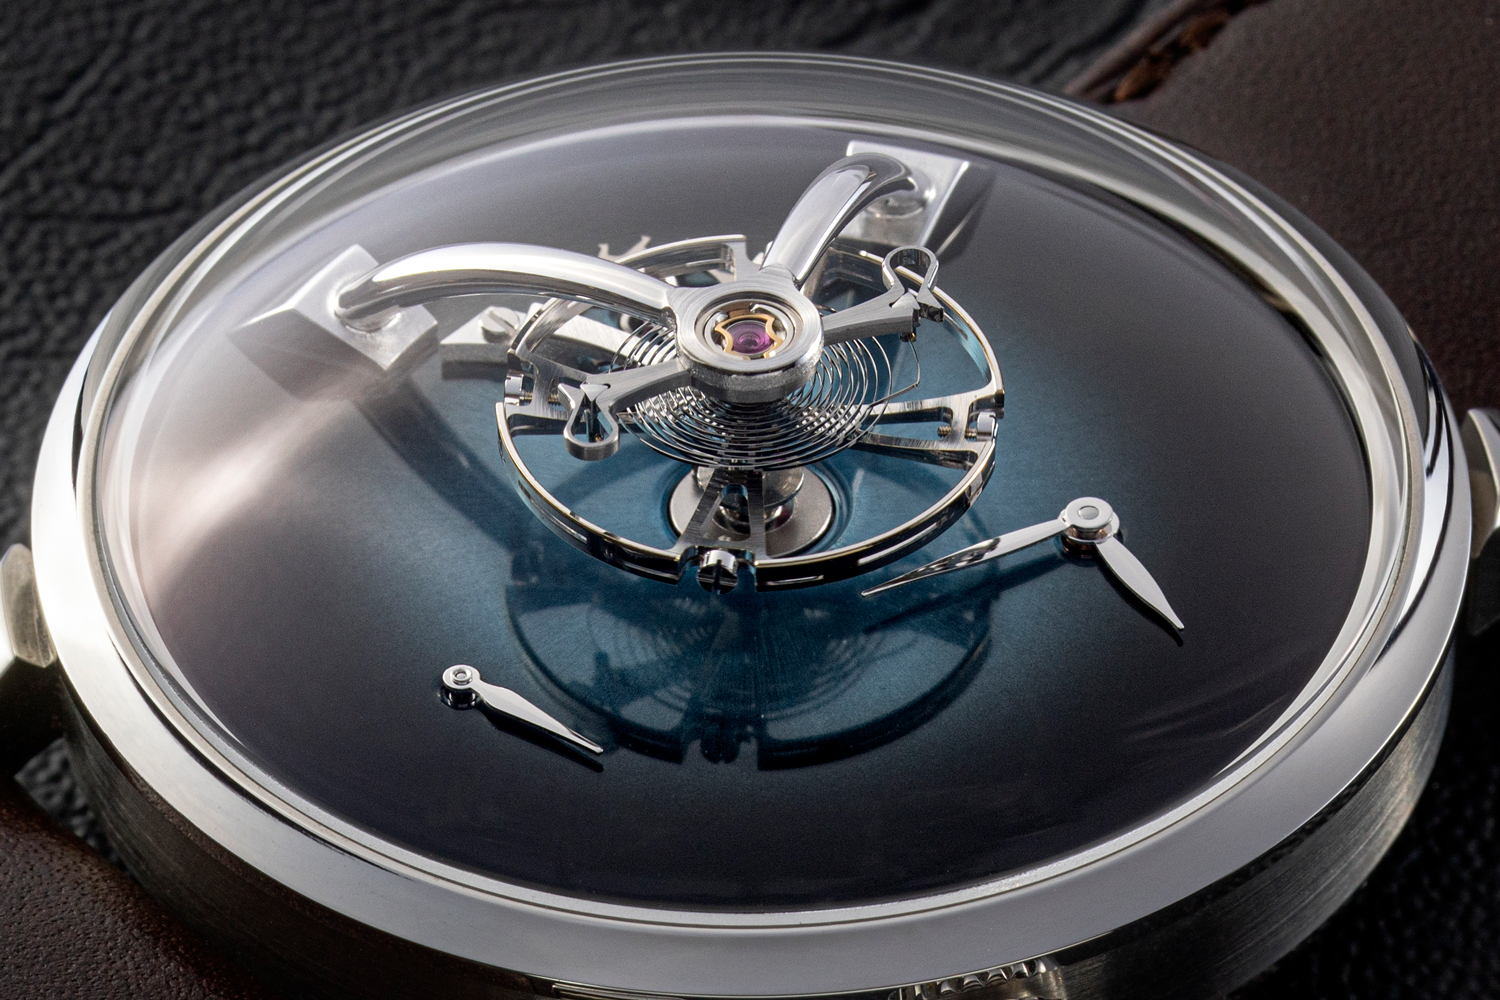 The LM101 here with no subdials or brand indications just like Moser’s Concept watches, fume dials and MB&F's signature balance wheel, but now with the double hairsprings of H. Moser's (©Revolution)